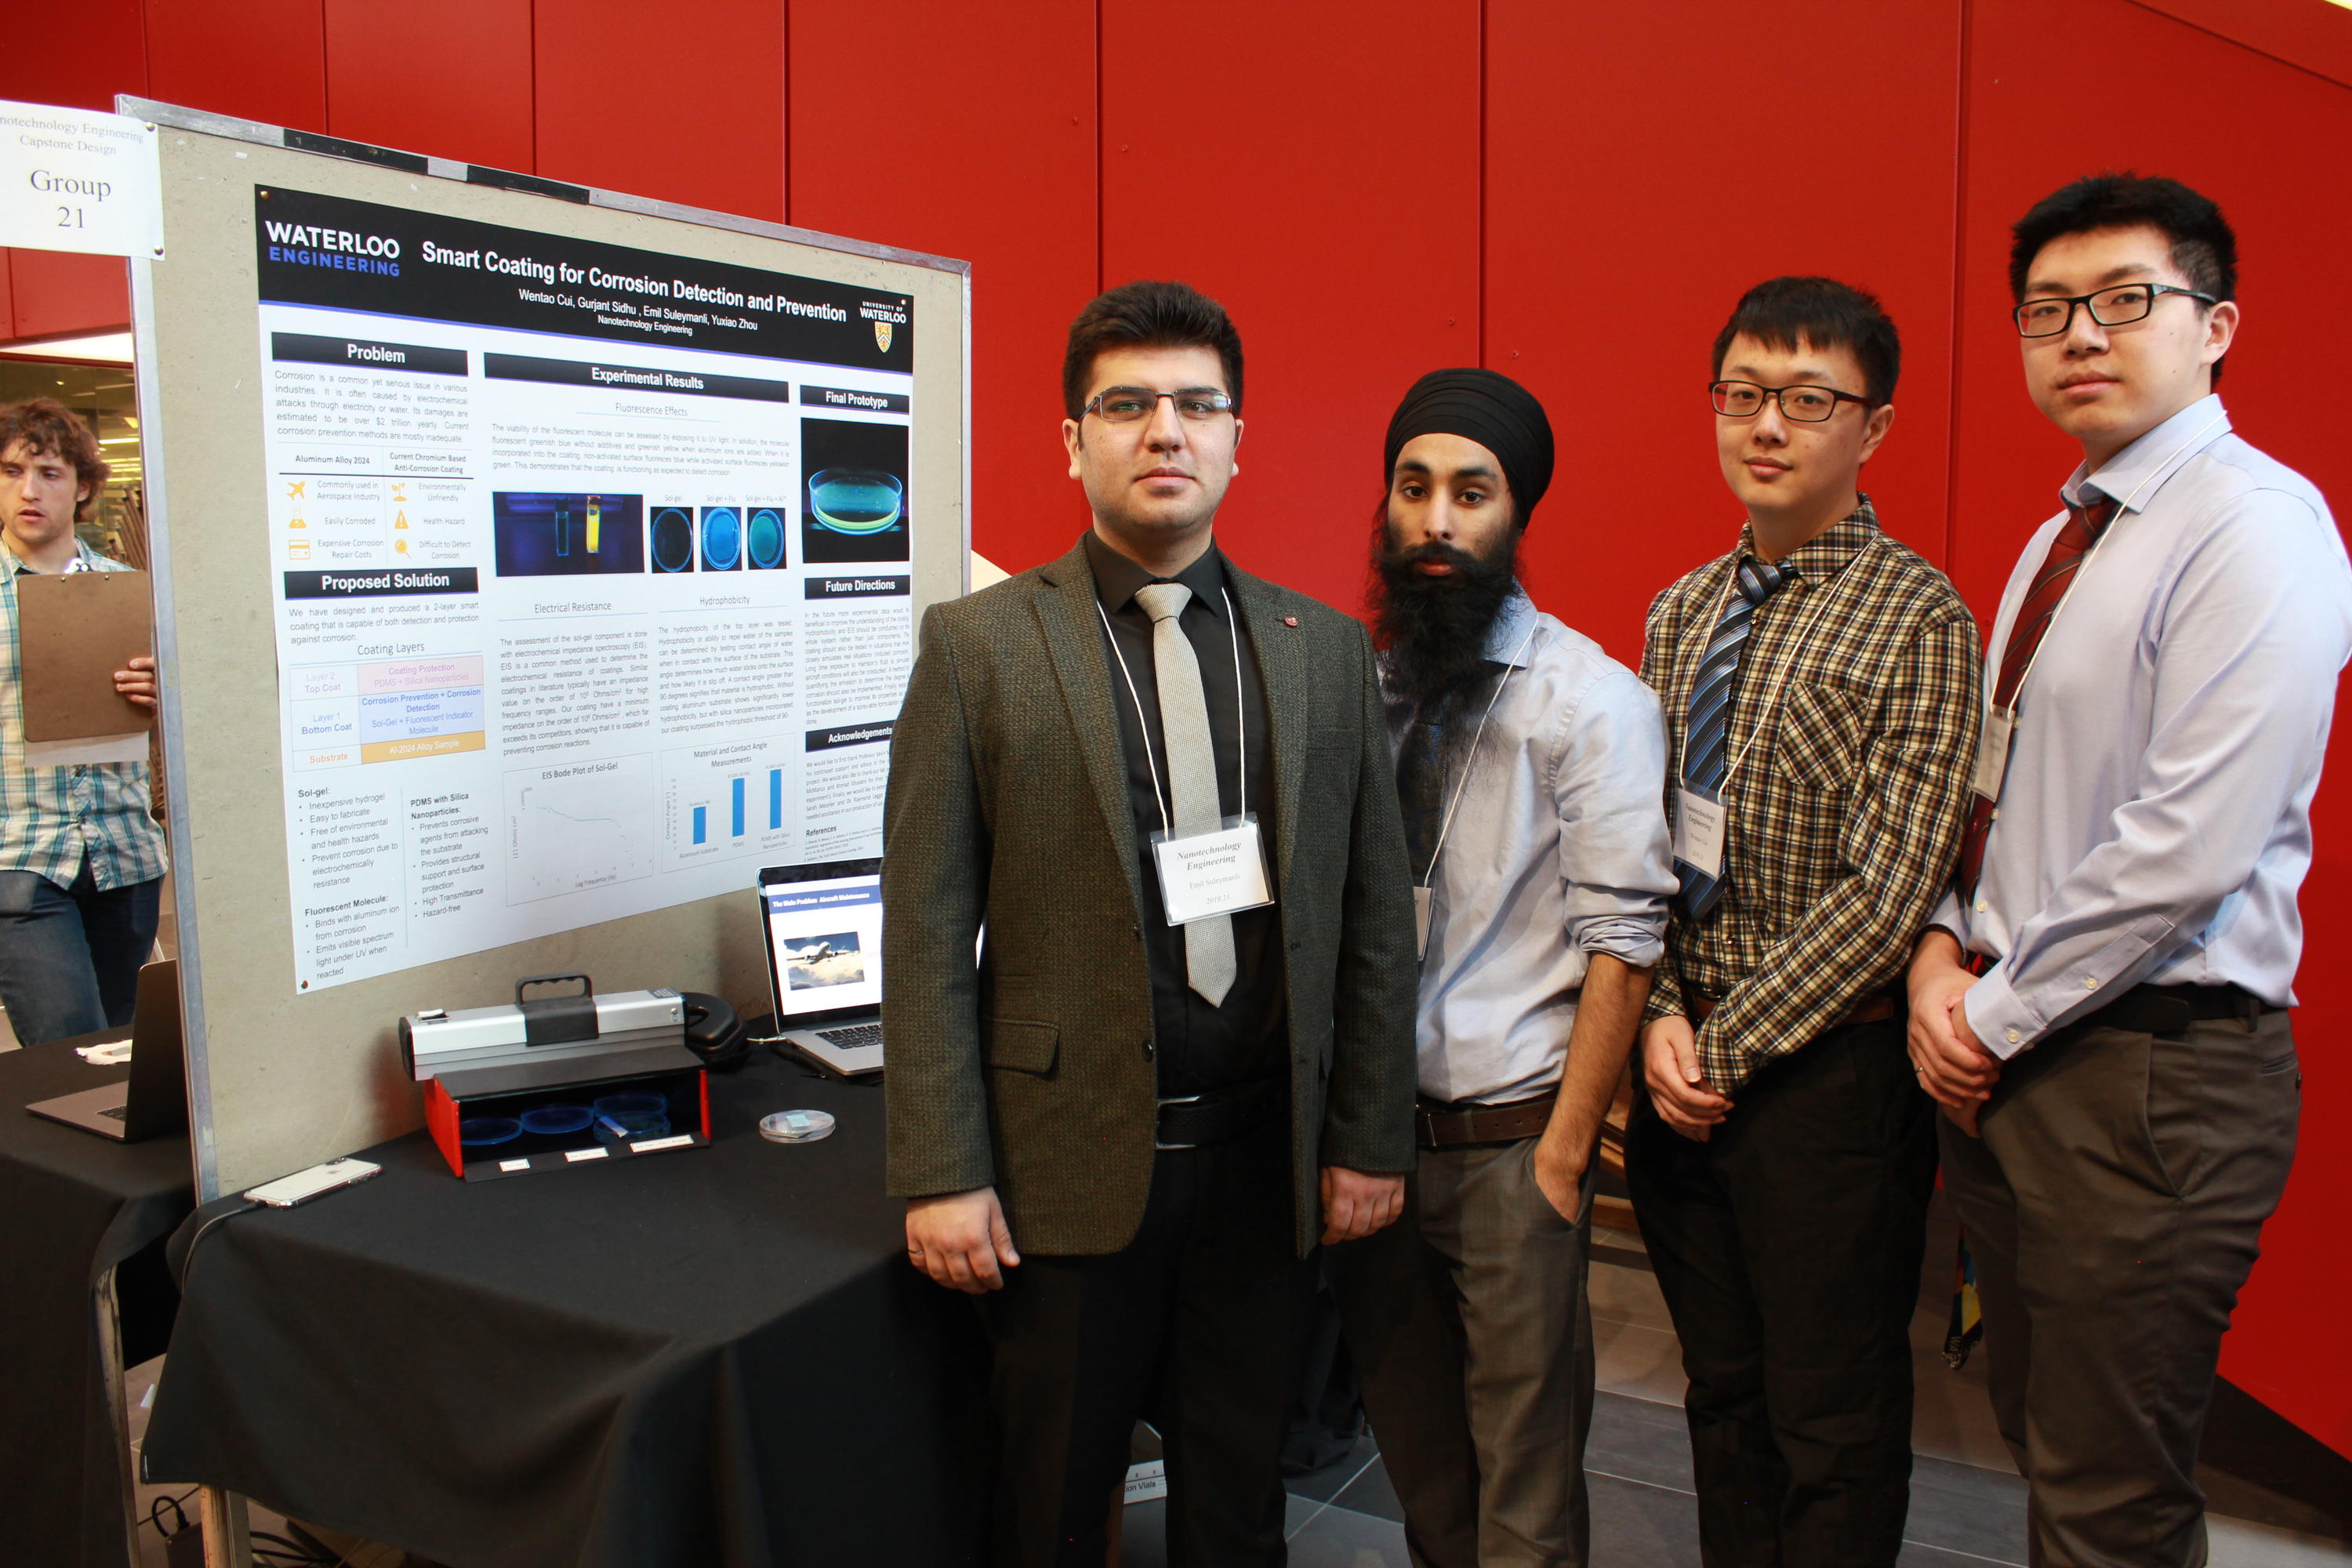 Team 21 students with their project poster at the 2019 Capstone Design Symposium.